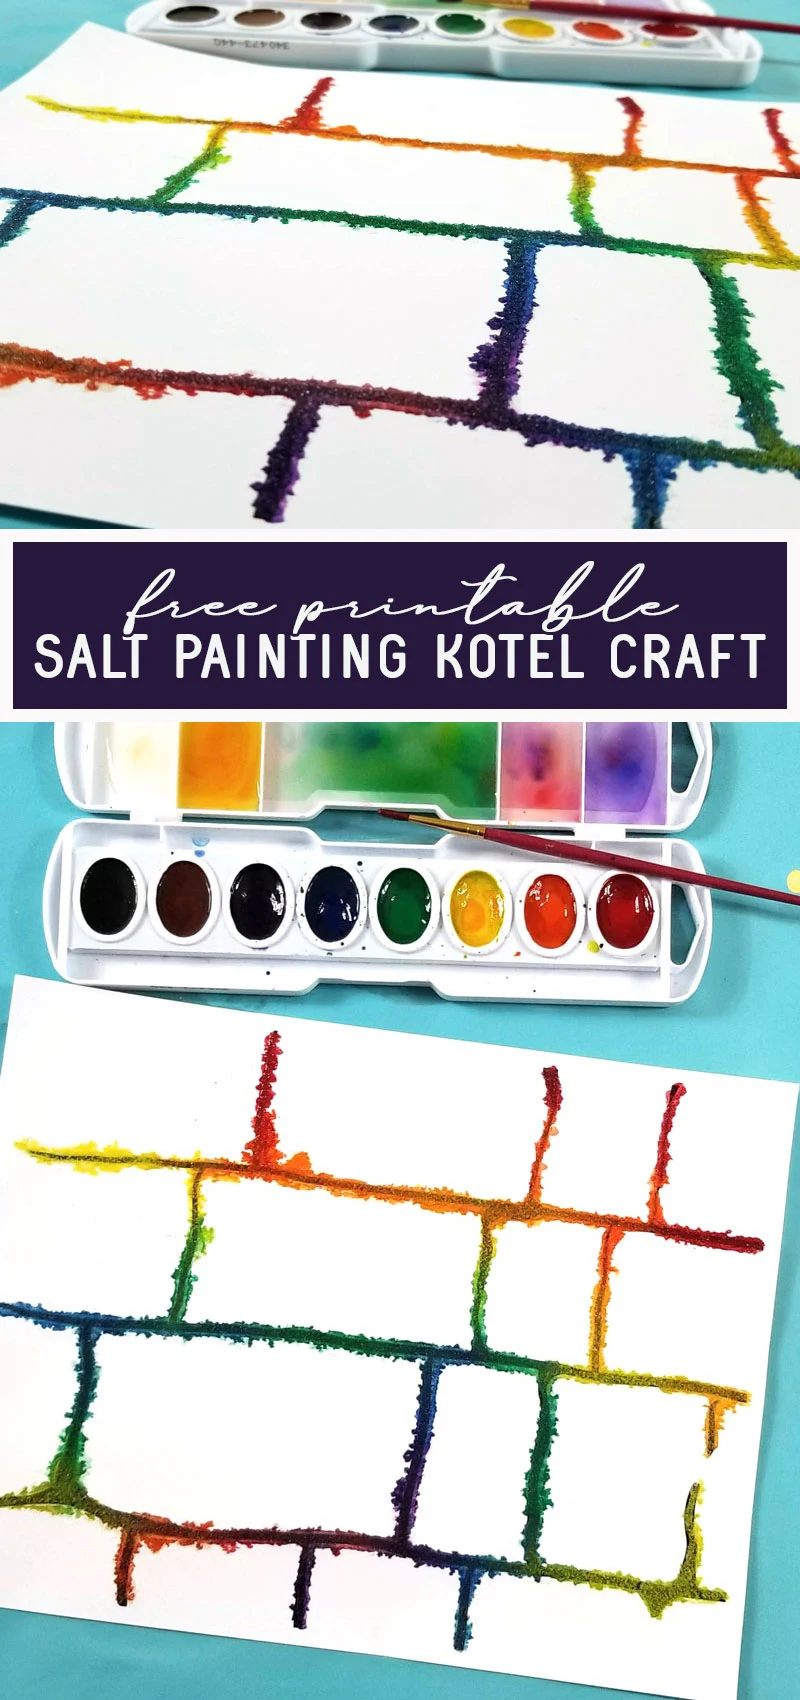 Kotel salt art craft - a Jewish Steam craft and activity - Hebrew School Science. This fun Kotel craft and art project features salt painting and watercolors- a fun absorbency experiment and a relaxing craft for kids or adults. 